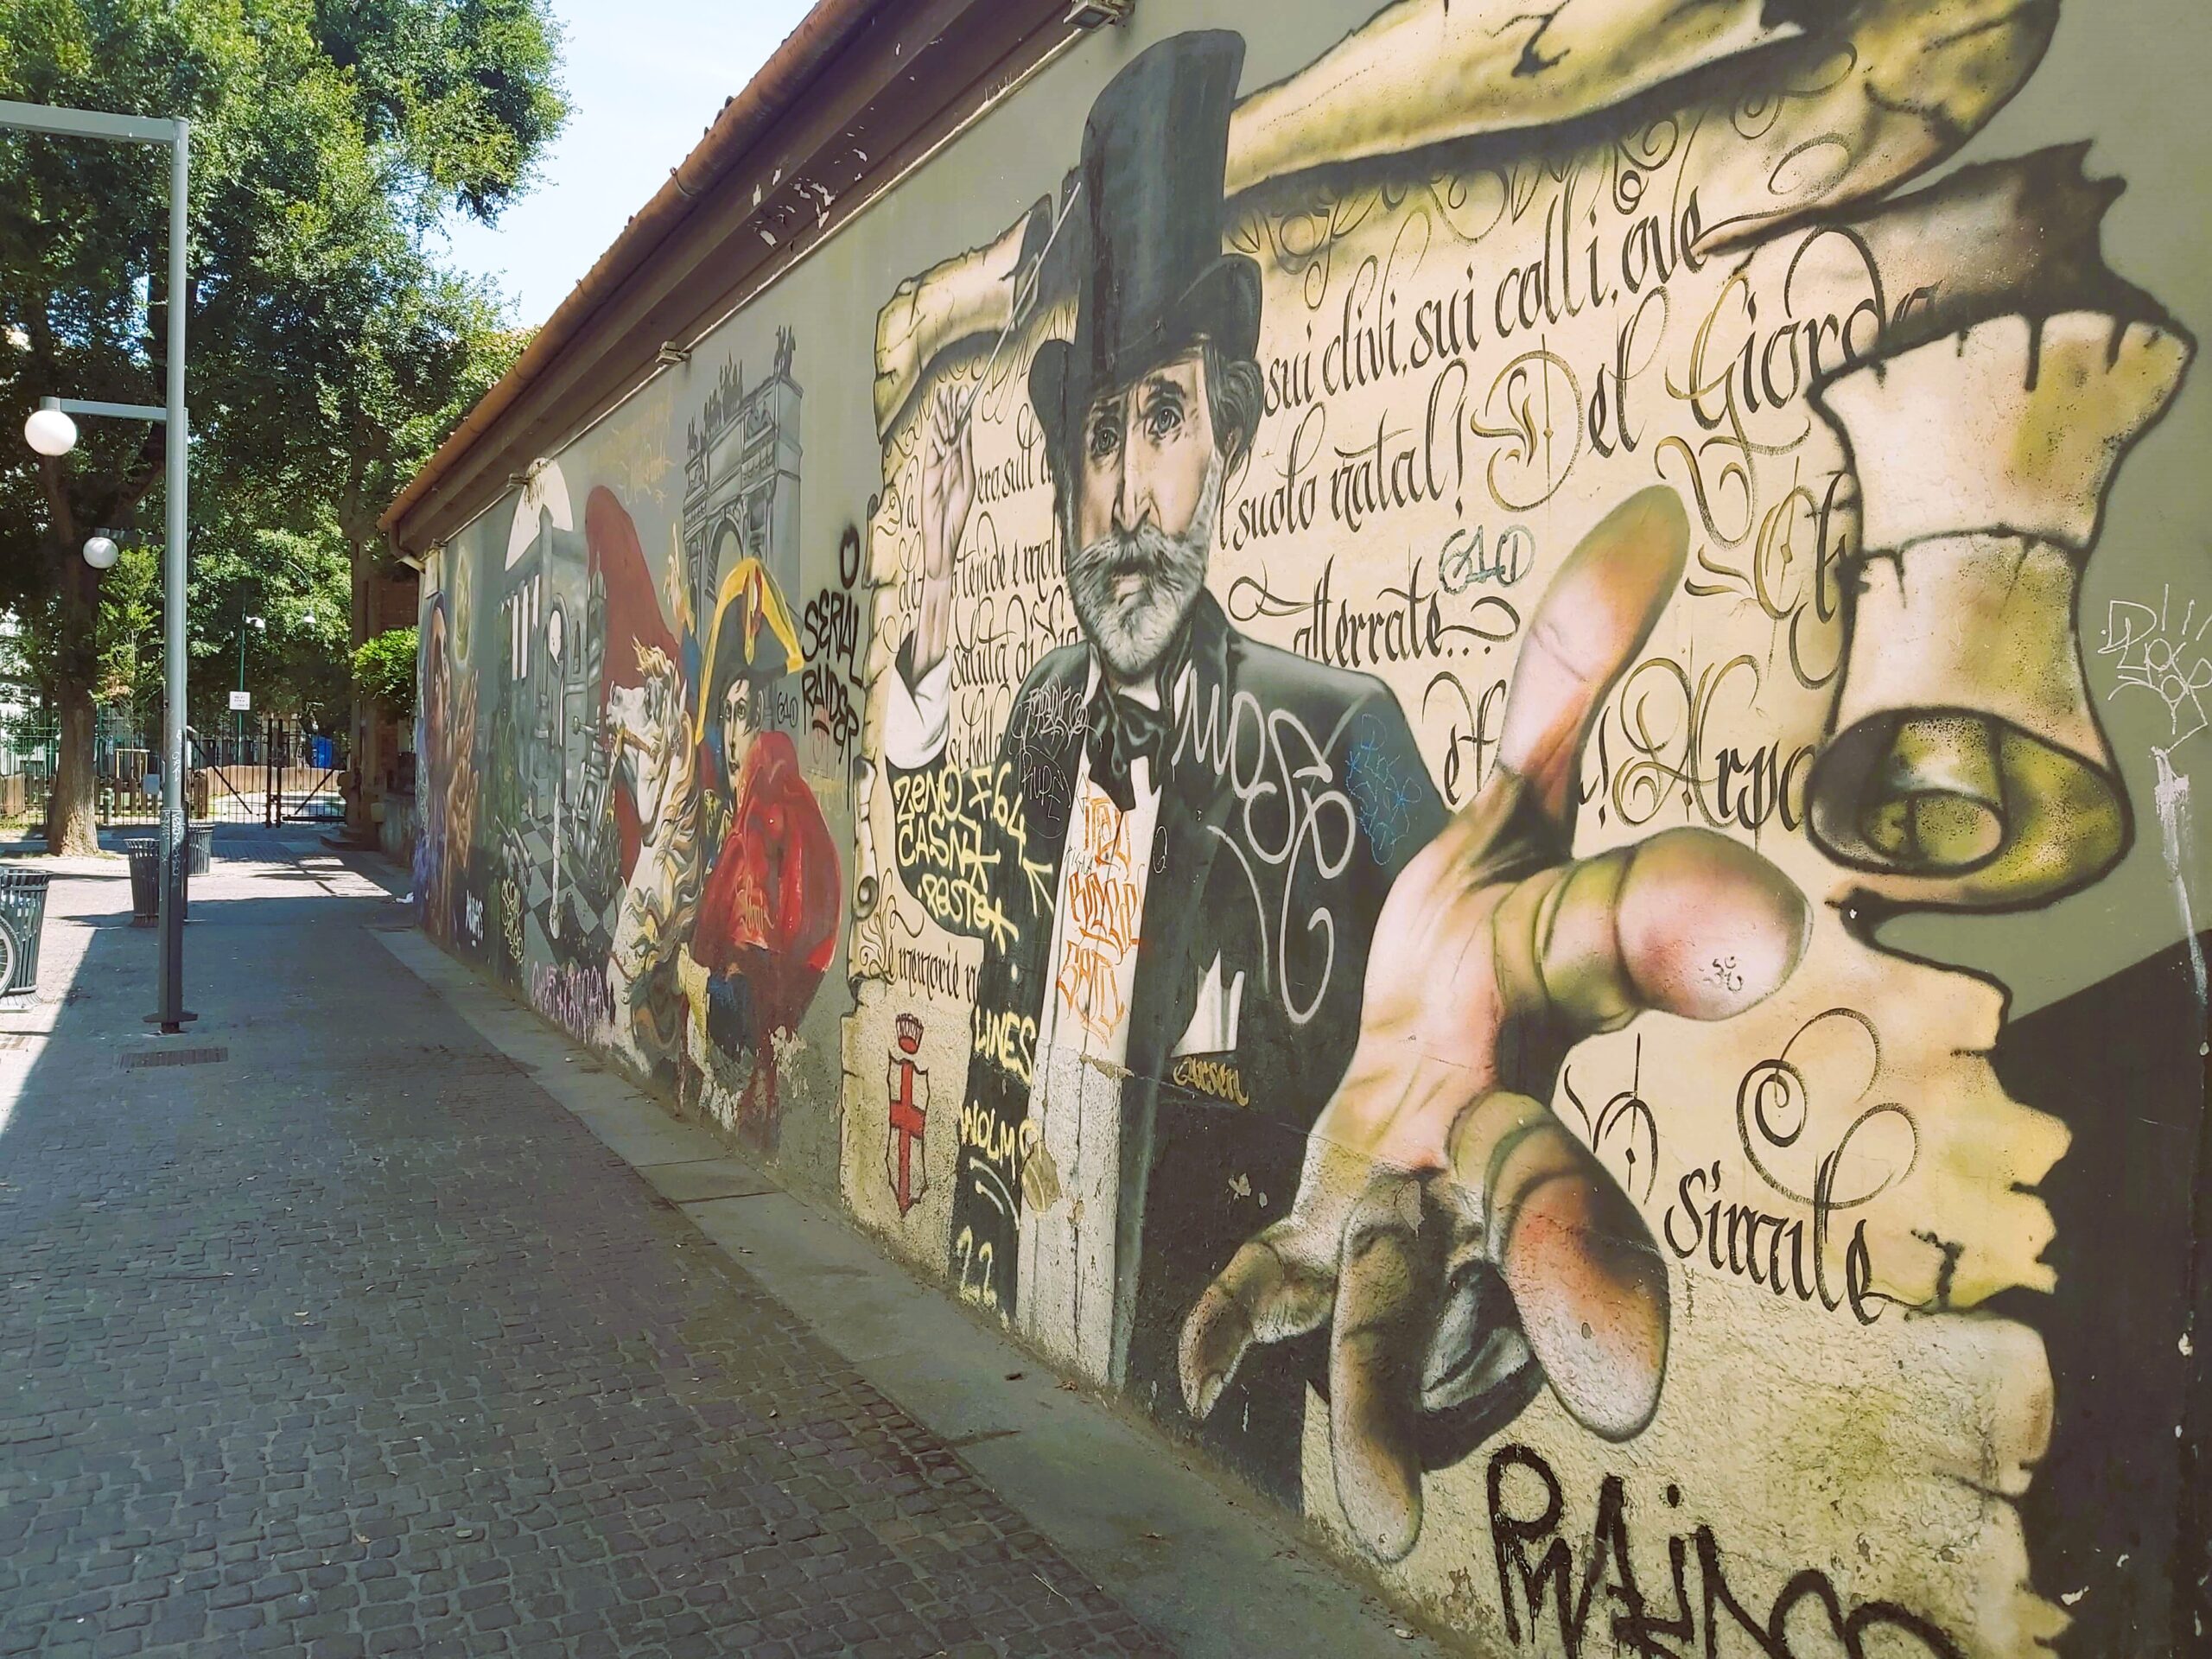 A graffiti image of a man wearing a top hat in Milan, Italy